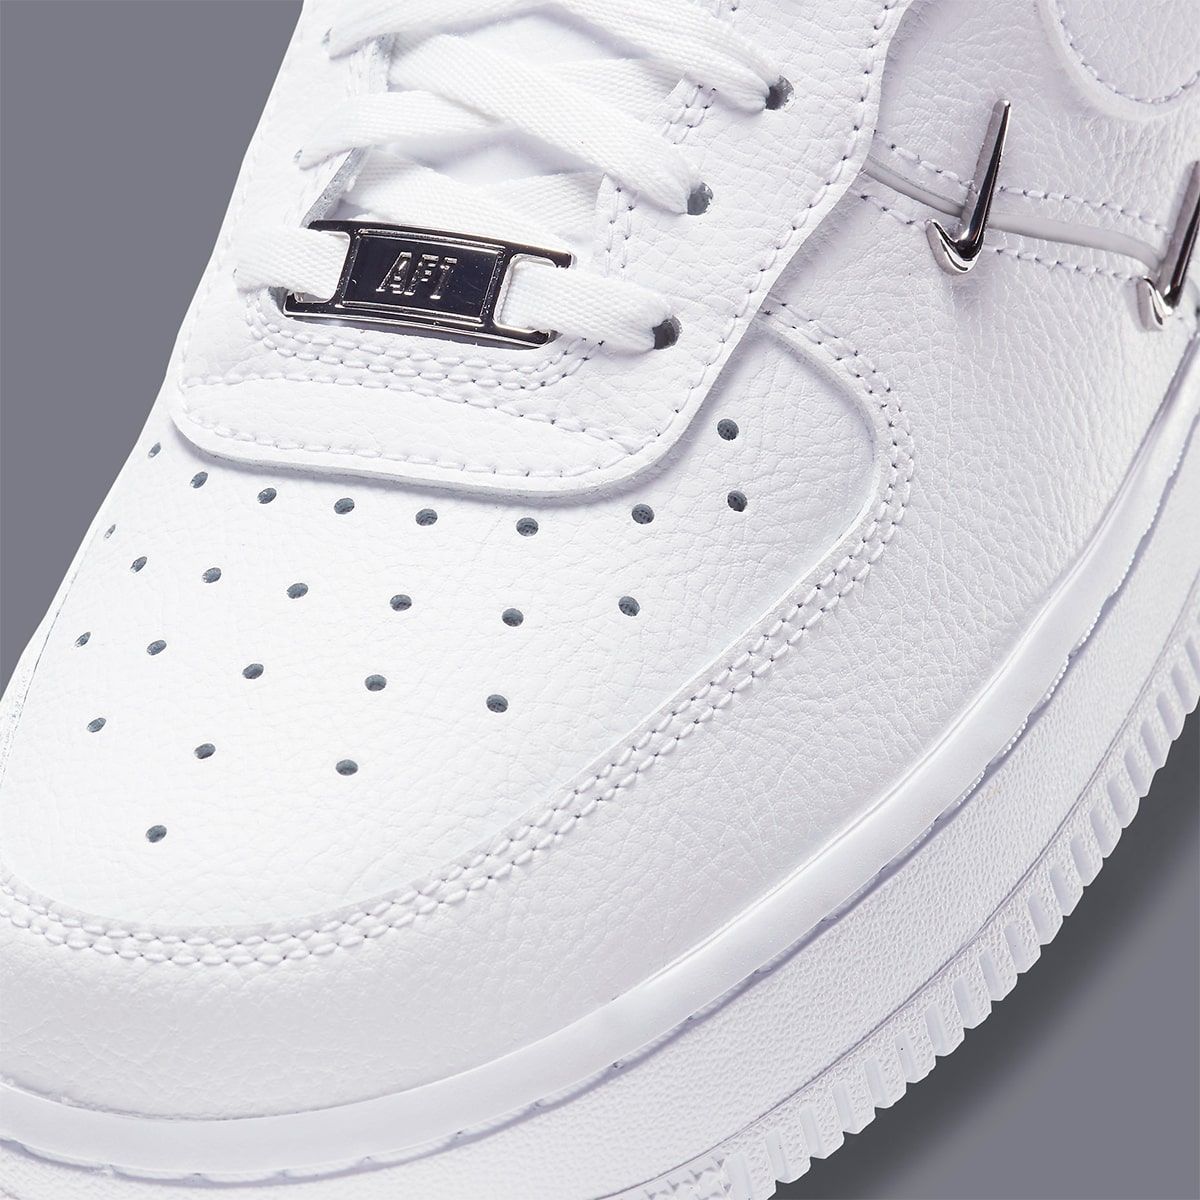 New Nike Air Force 1 LX Adds Mini Metallic Swooshes to the Mid-Panel ...